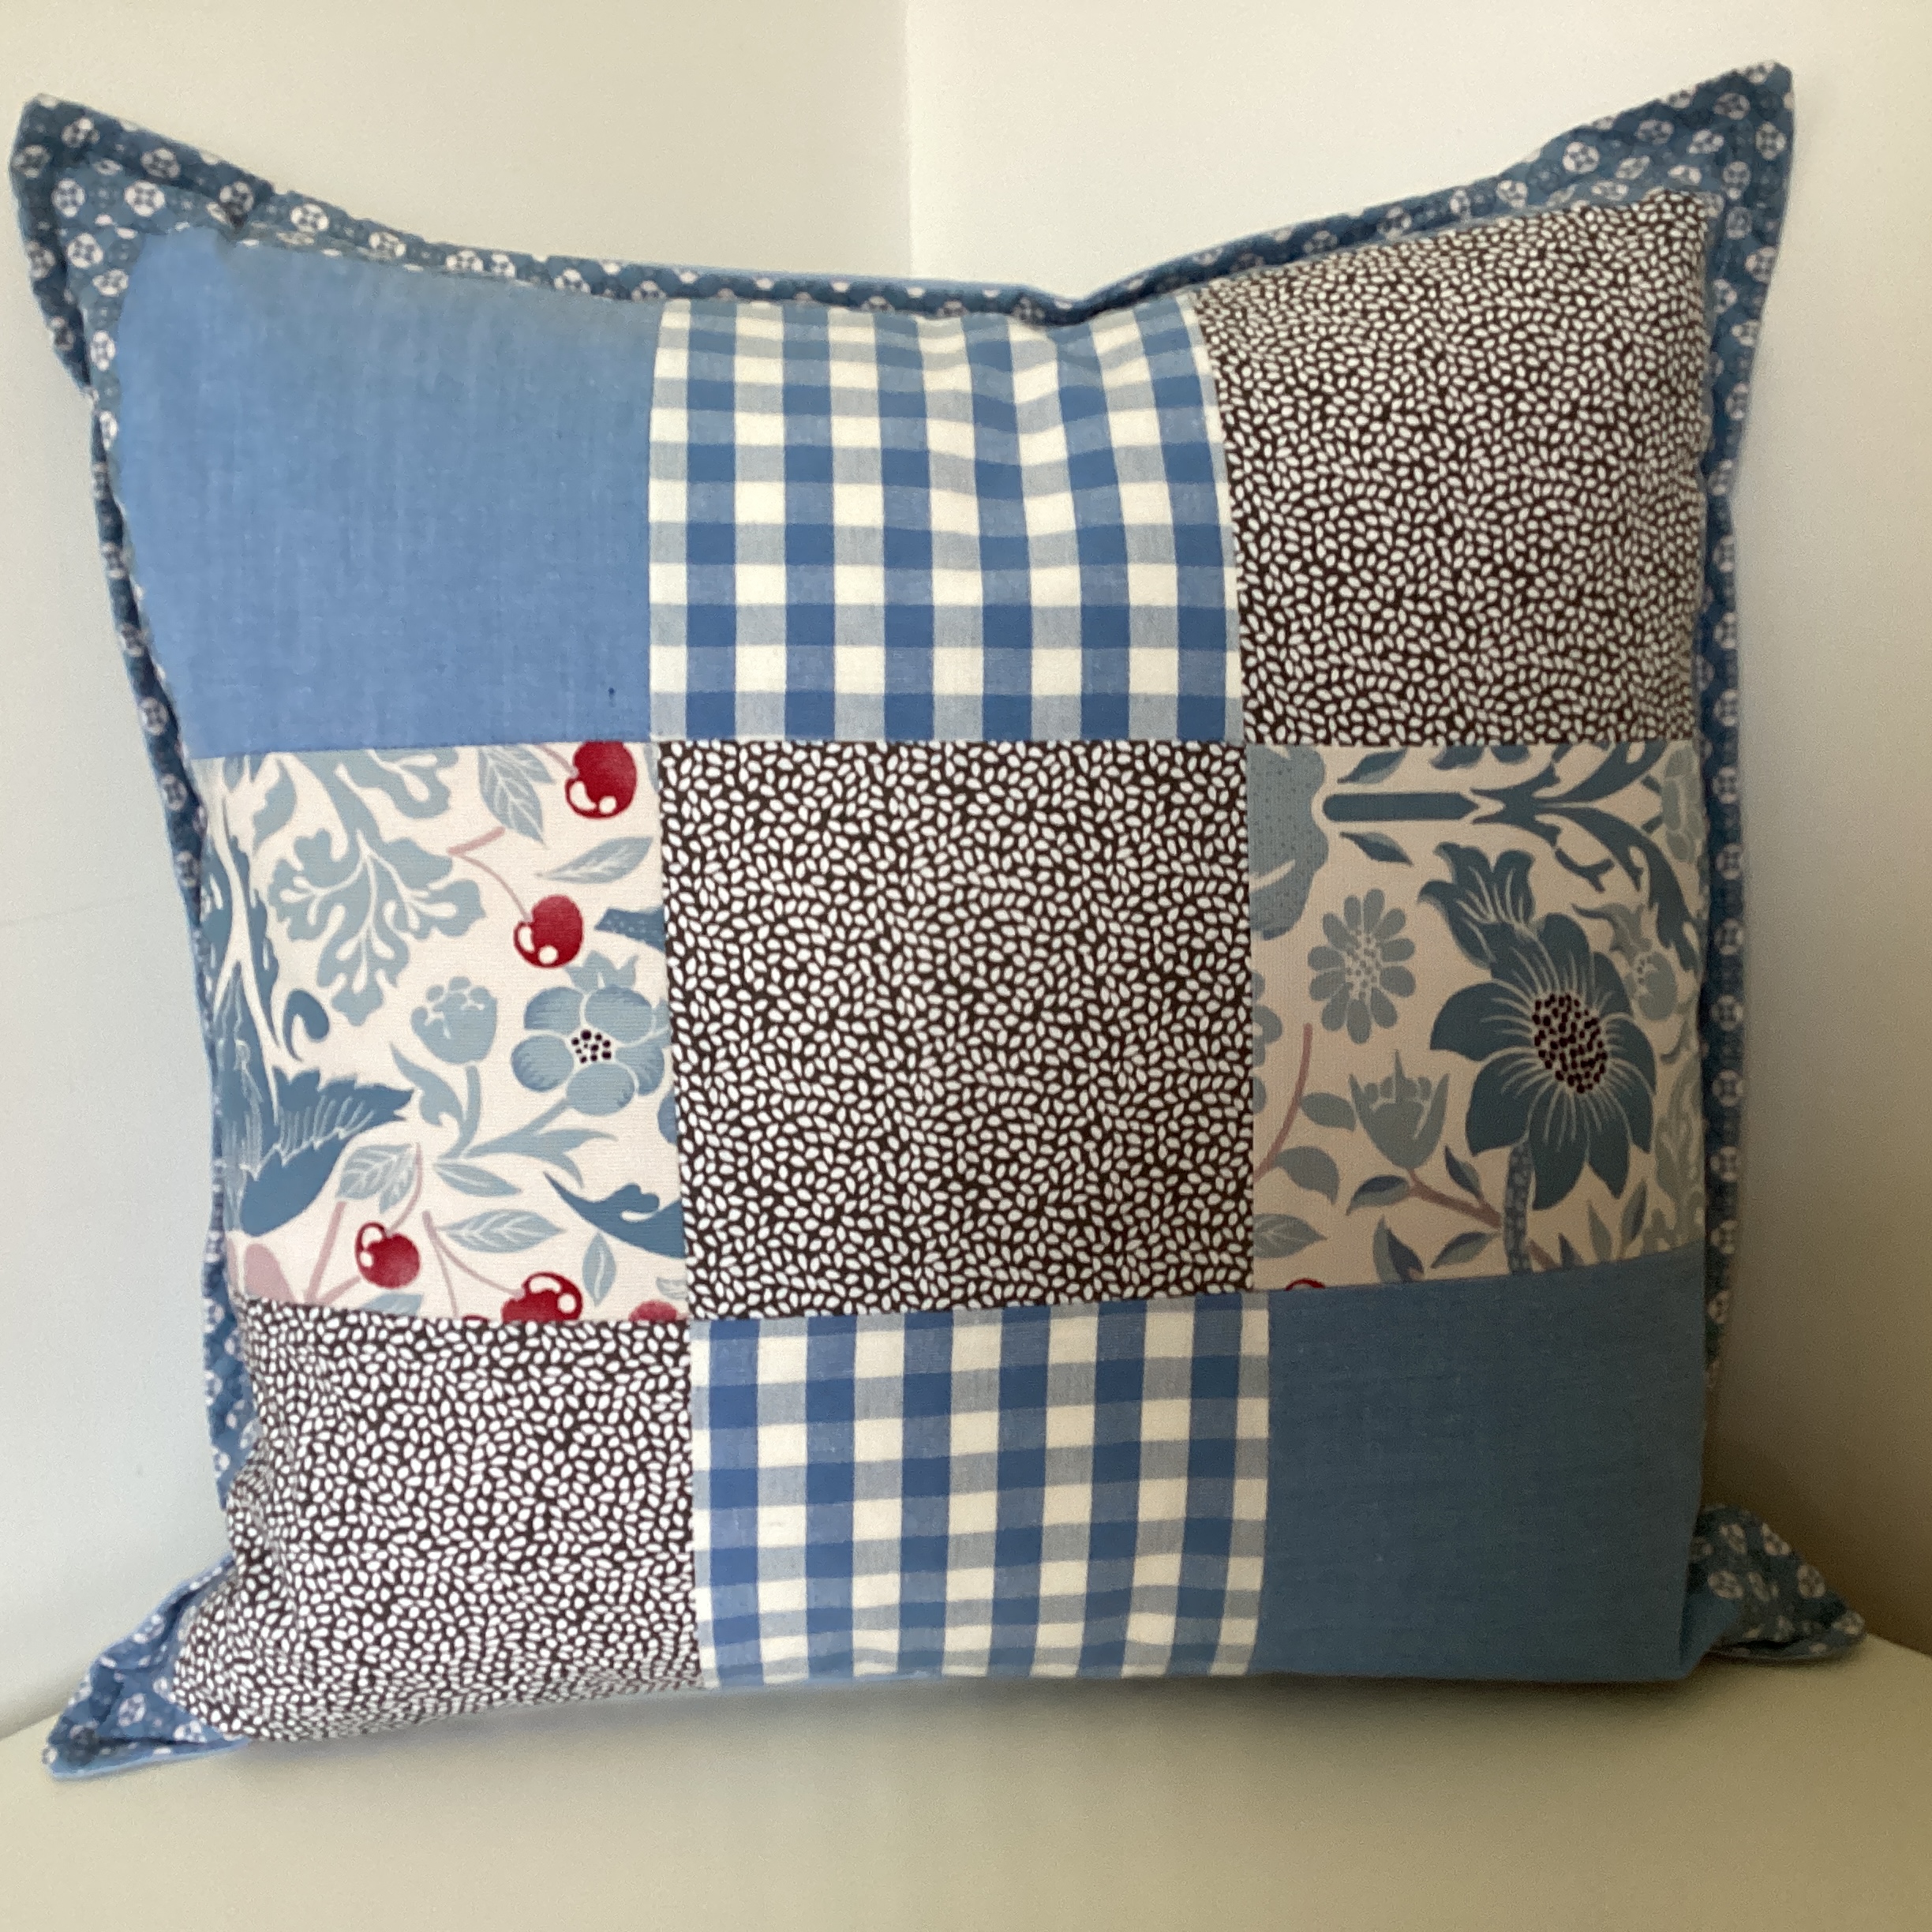 Cushion - patchwork in blue